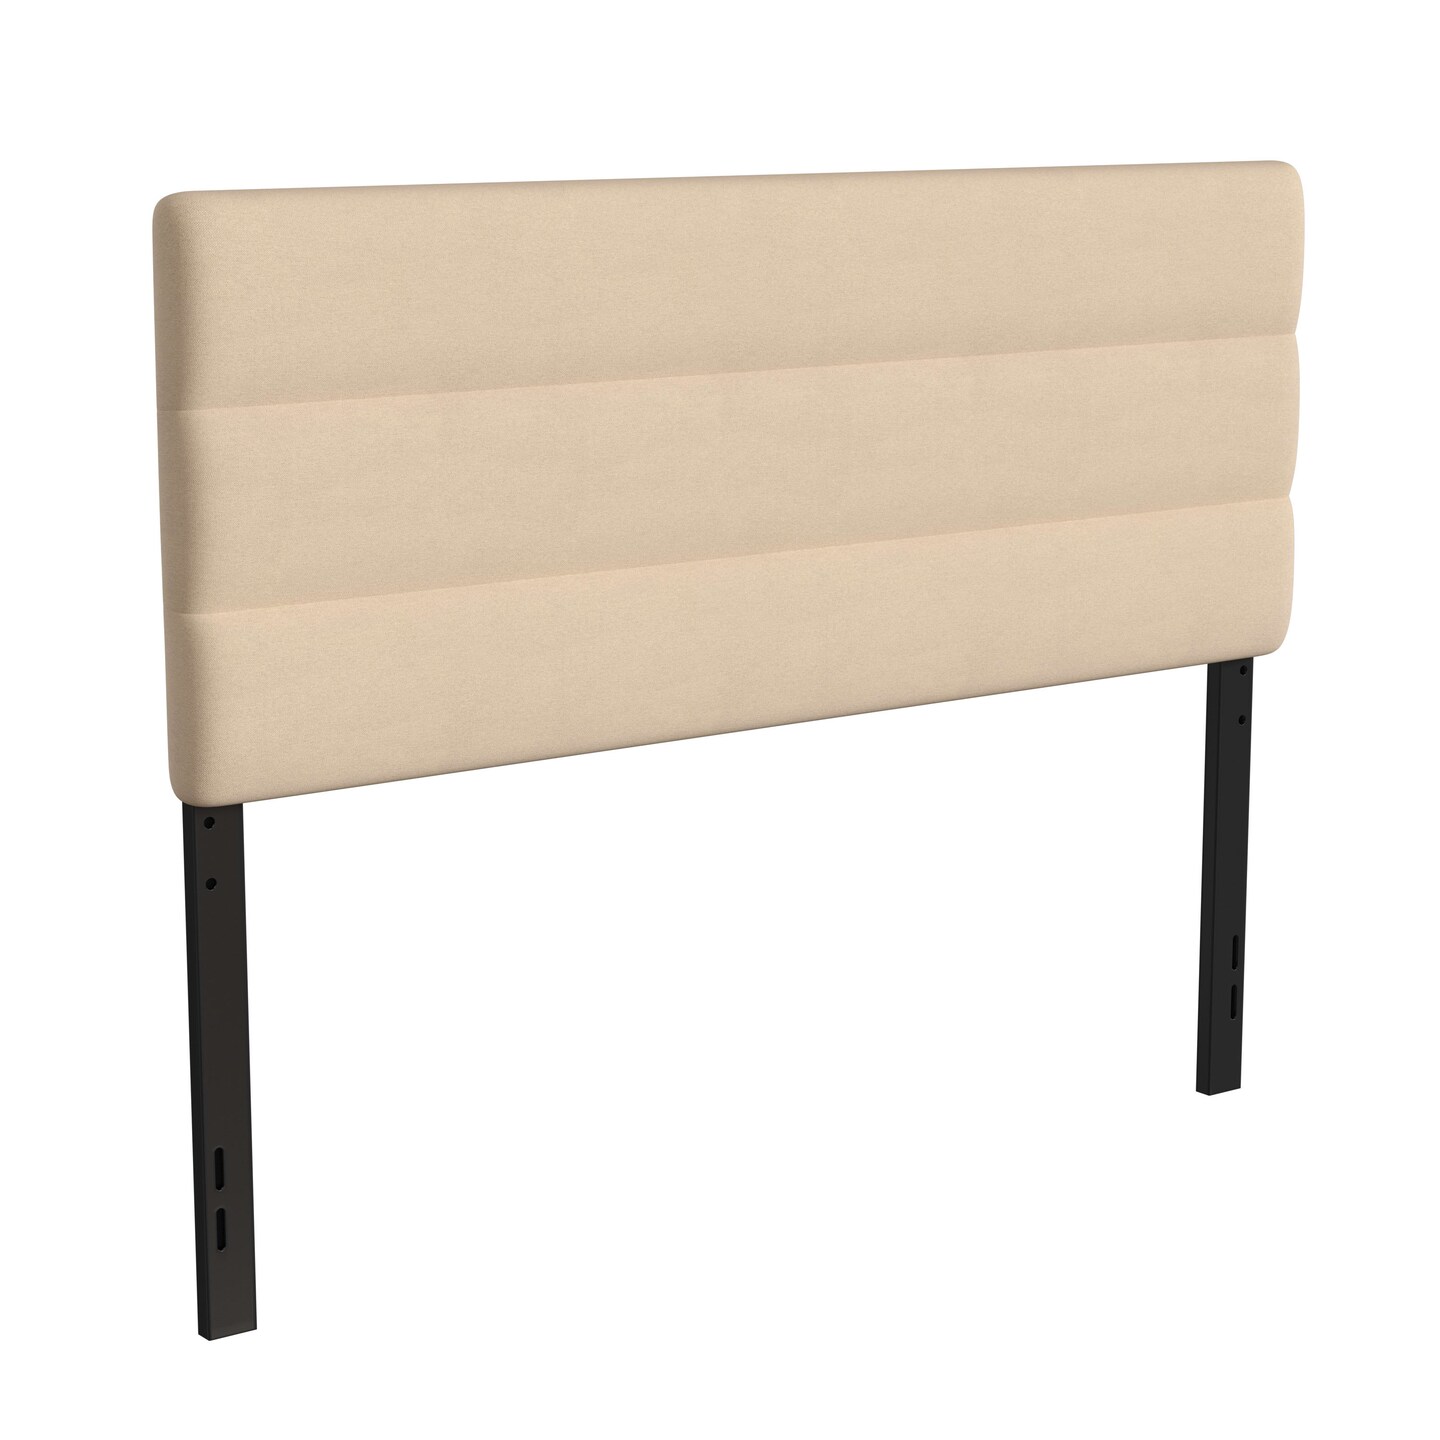 Merrick Lane Coppola Headboard with Tufted Upholstery and Powder Coated Metal Frame